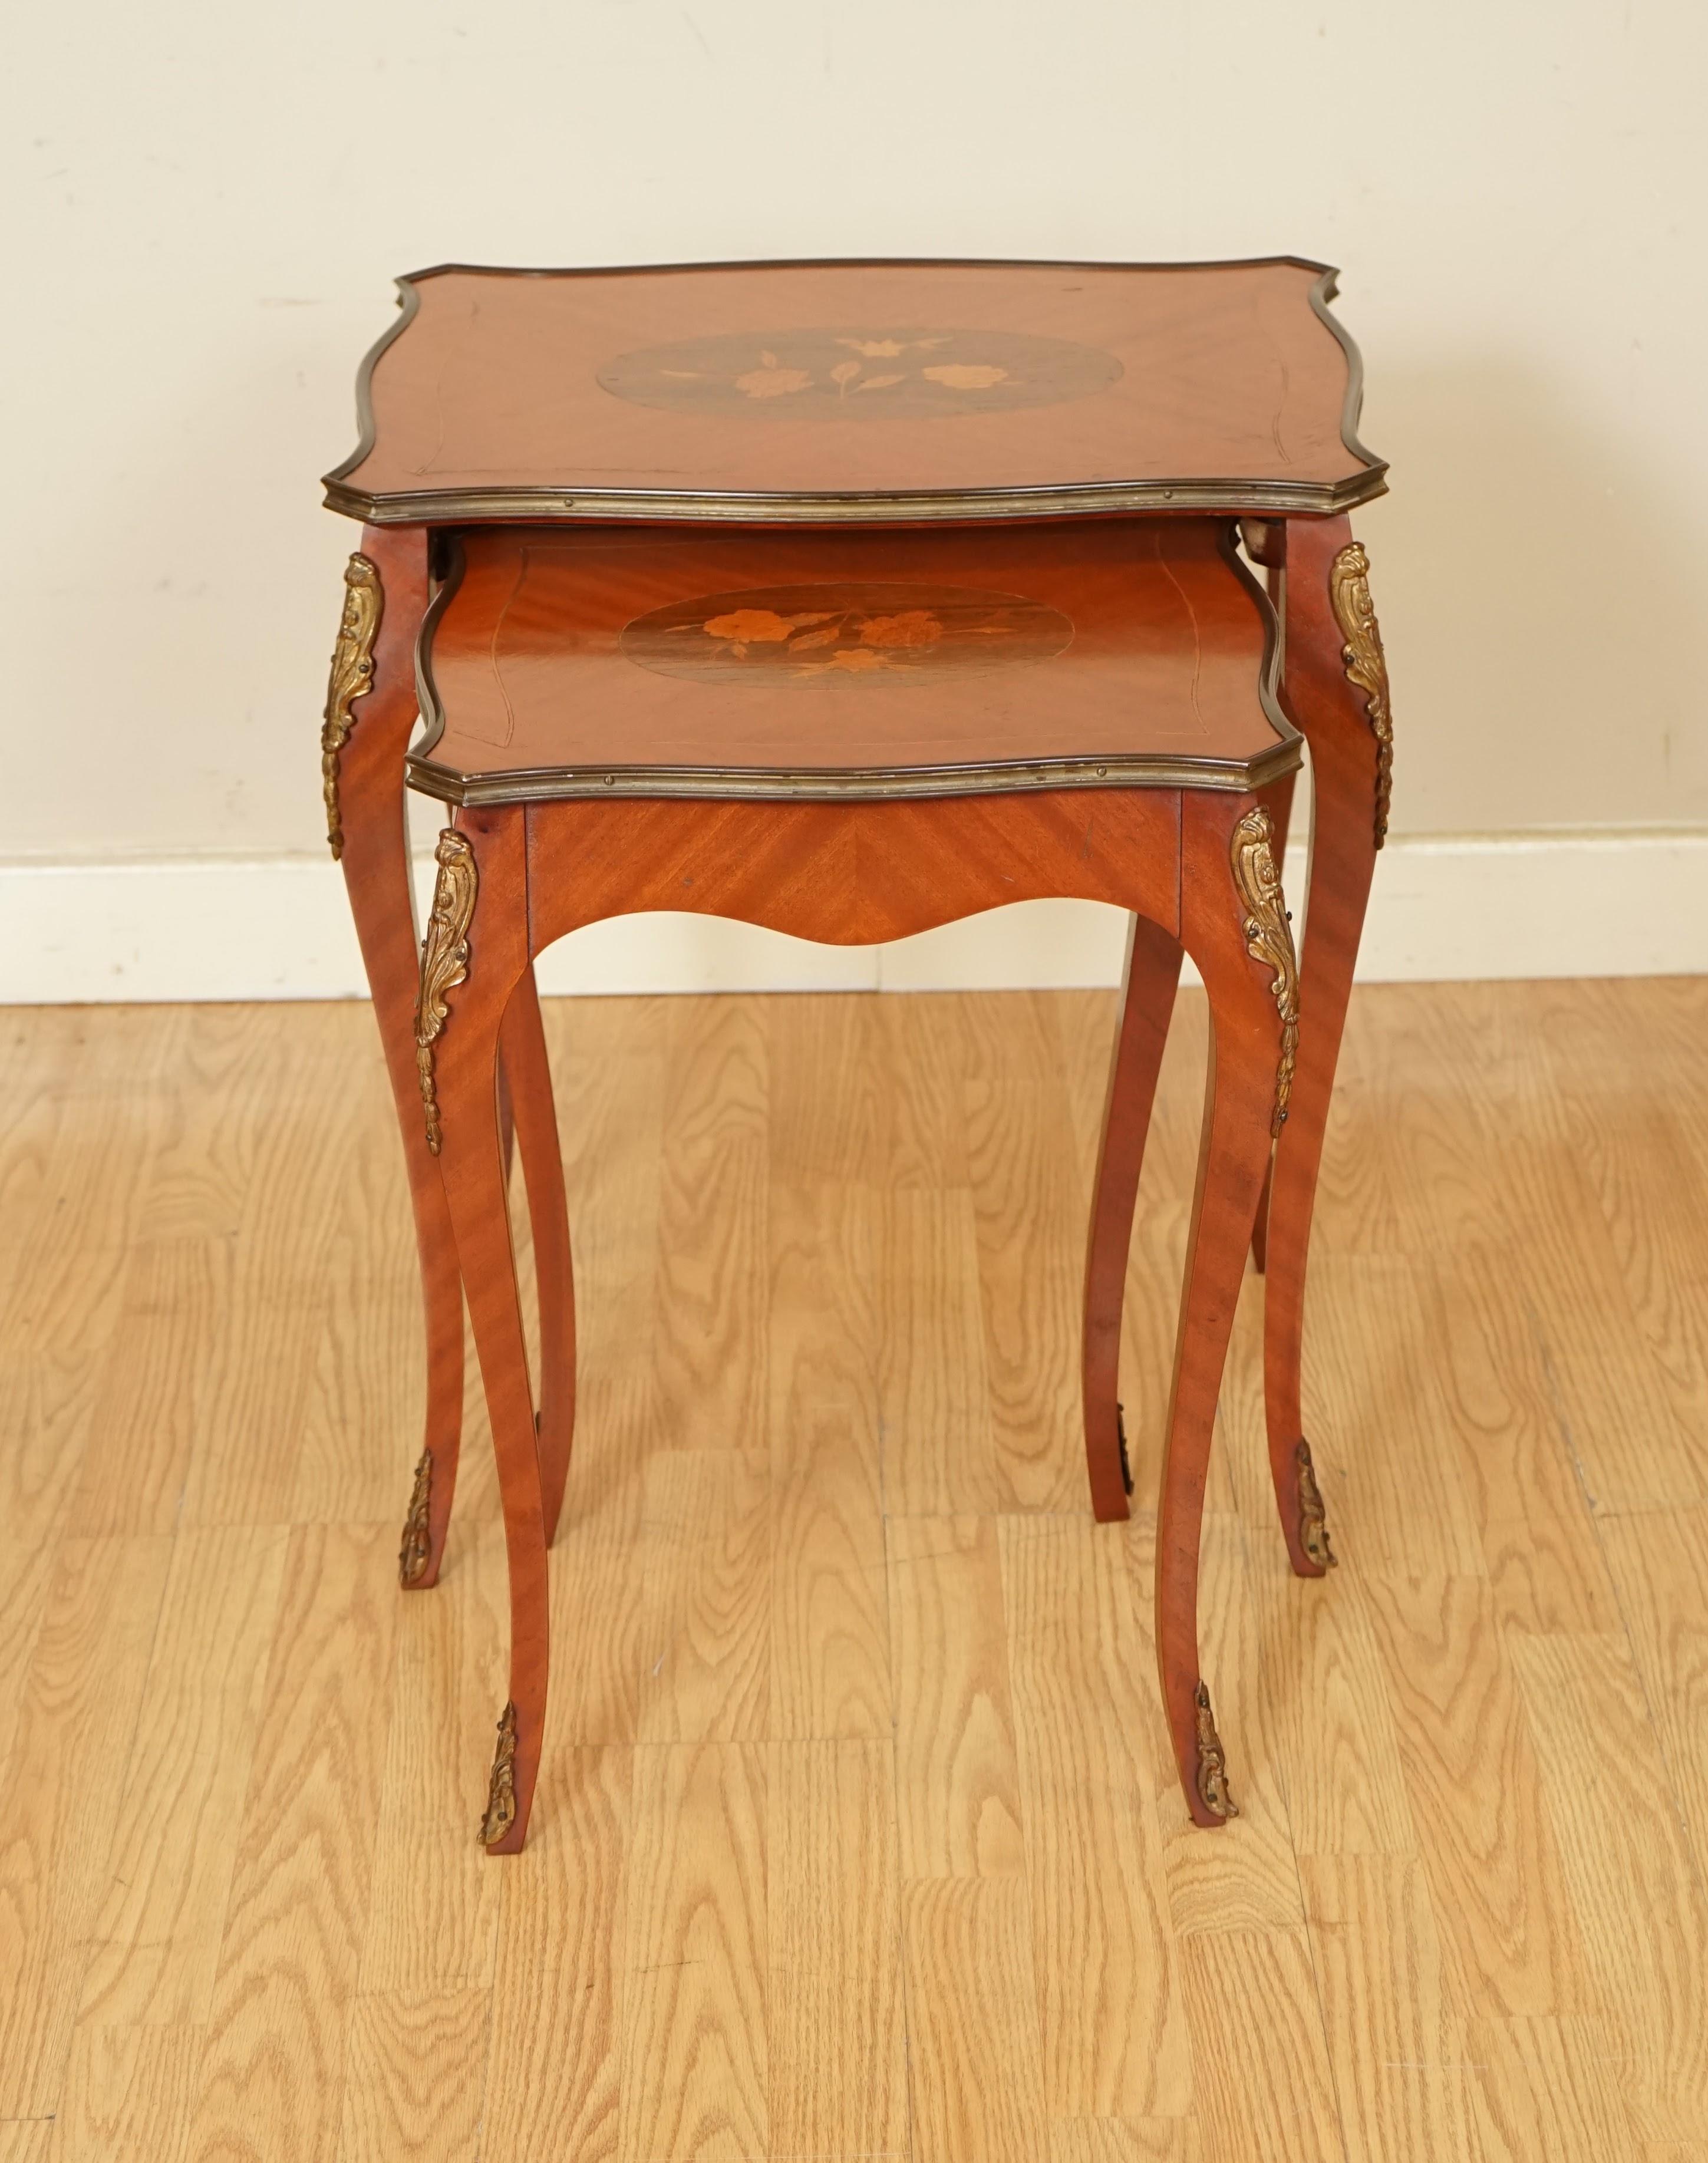 20th Century Lovely Vintage French Inlaid Parquetry Set of 2 Nesting Tables For Sale